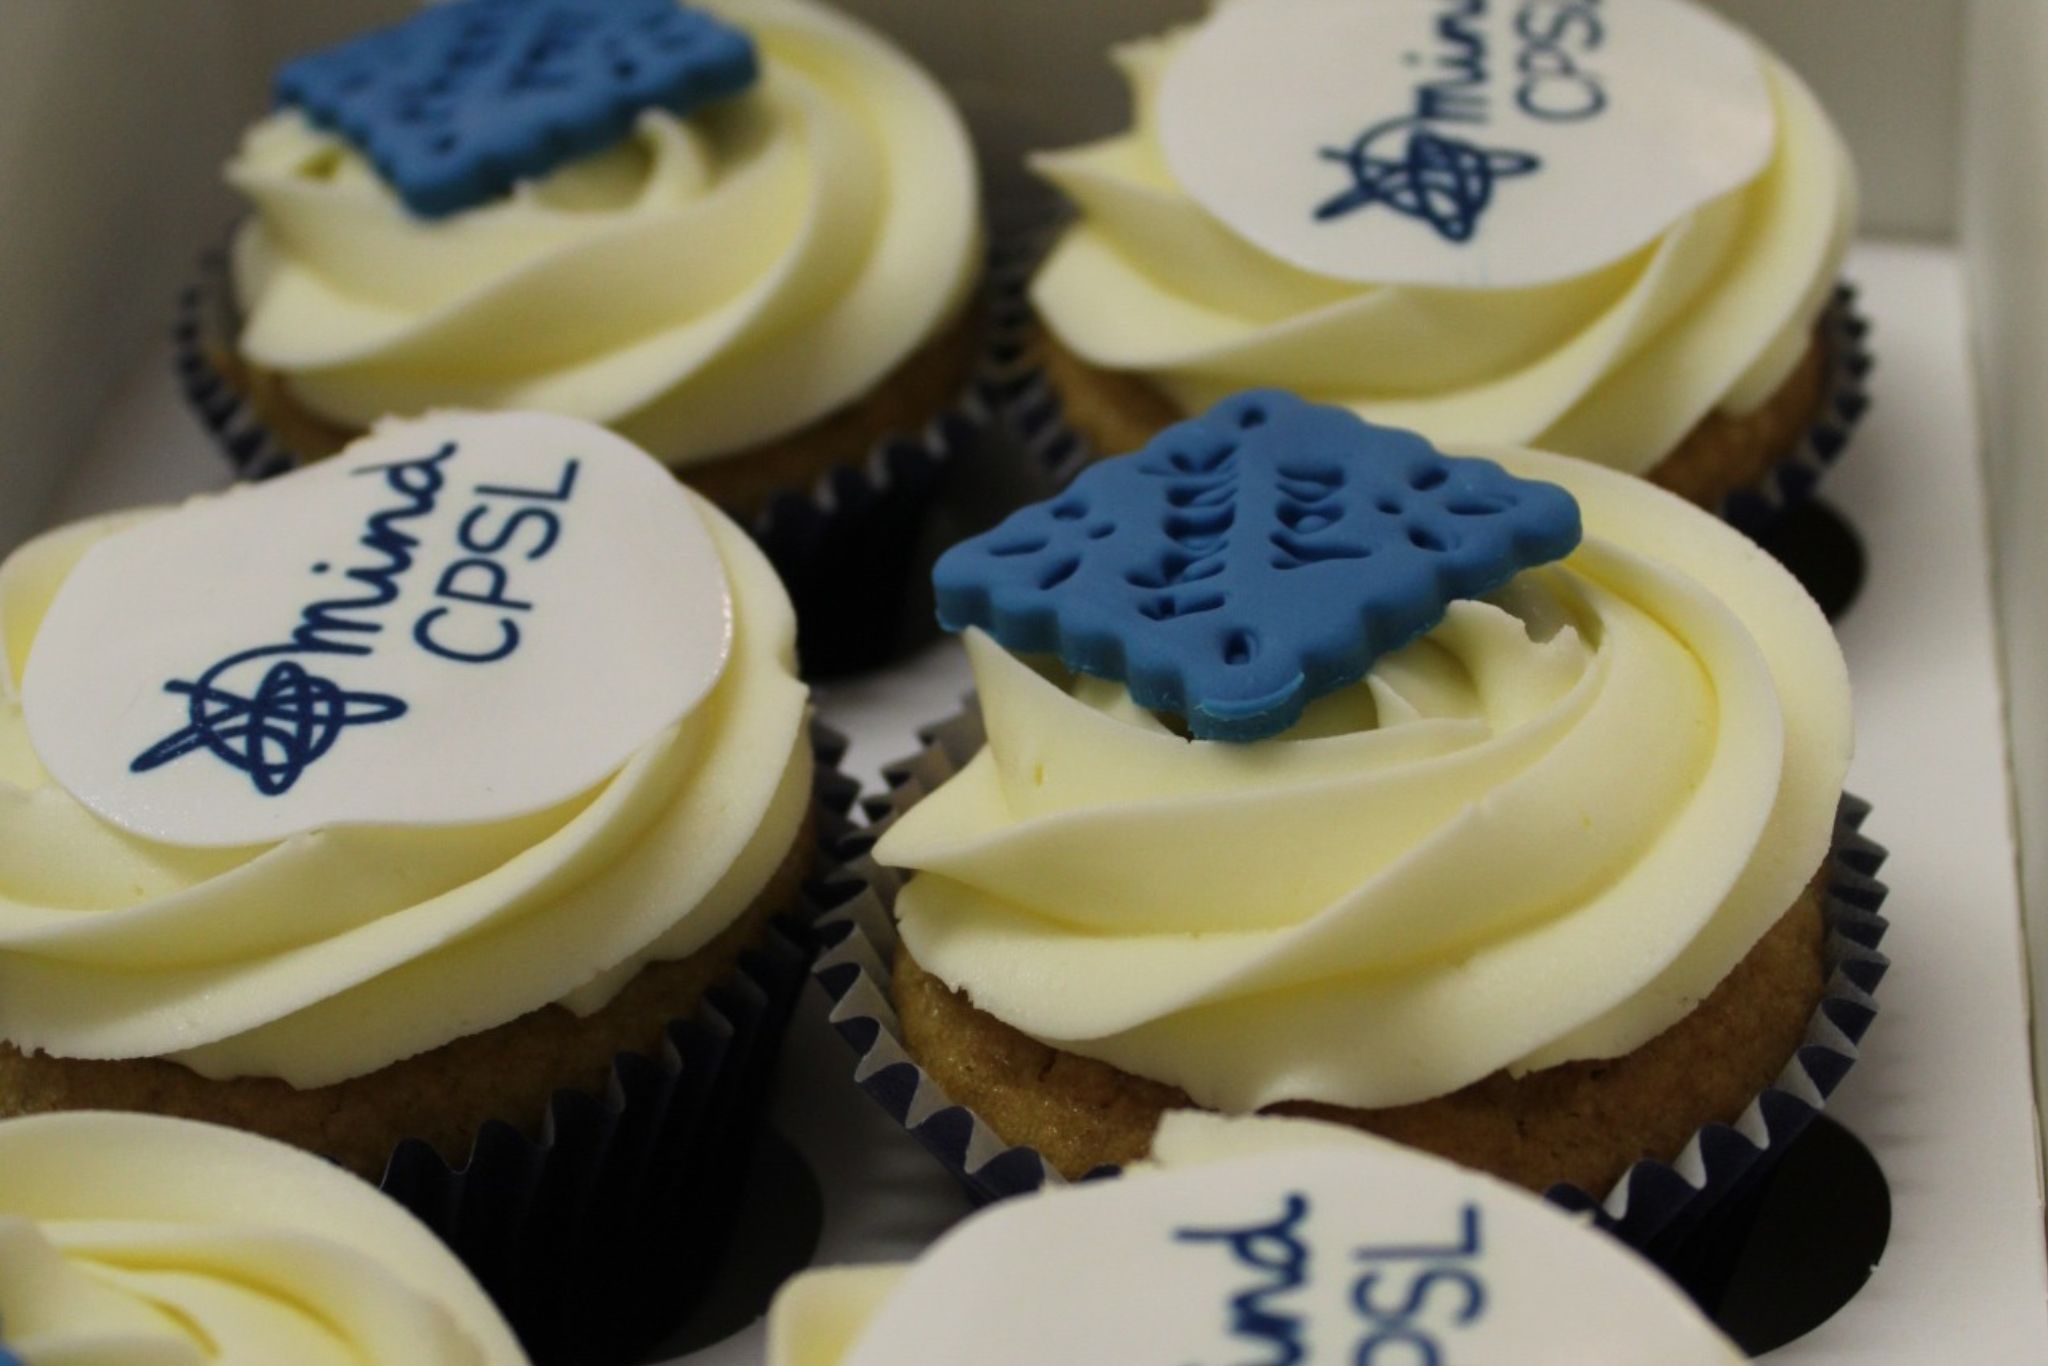 Cupcakes with CPSL Mind logo and thank you message